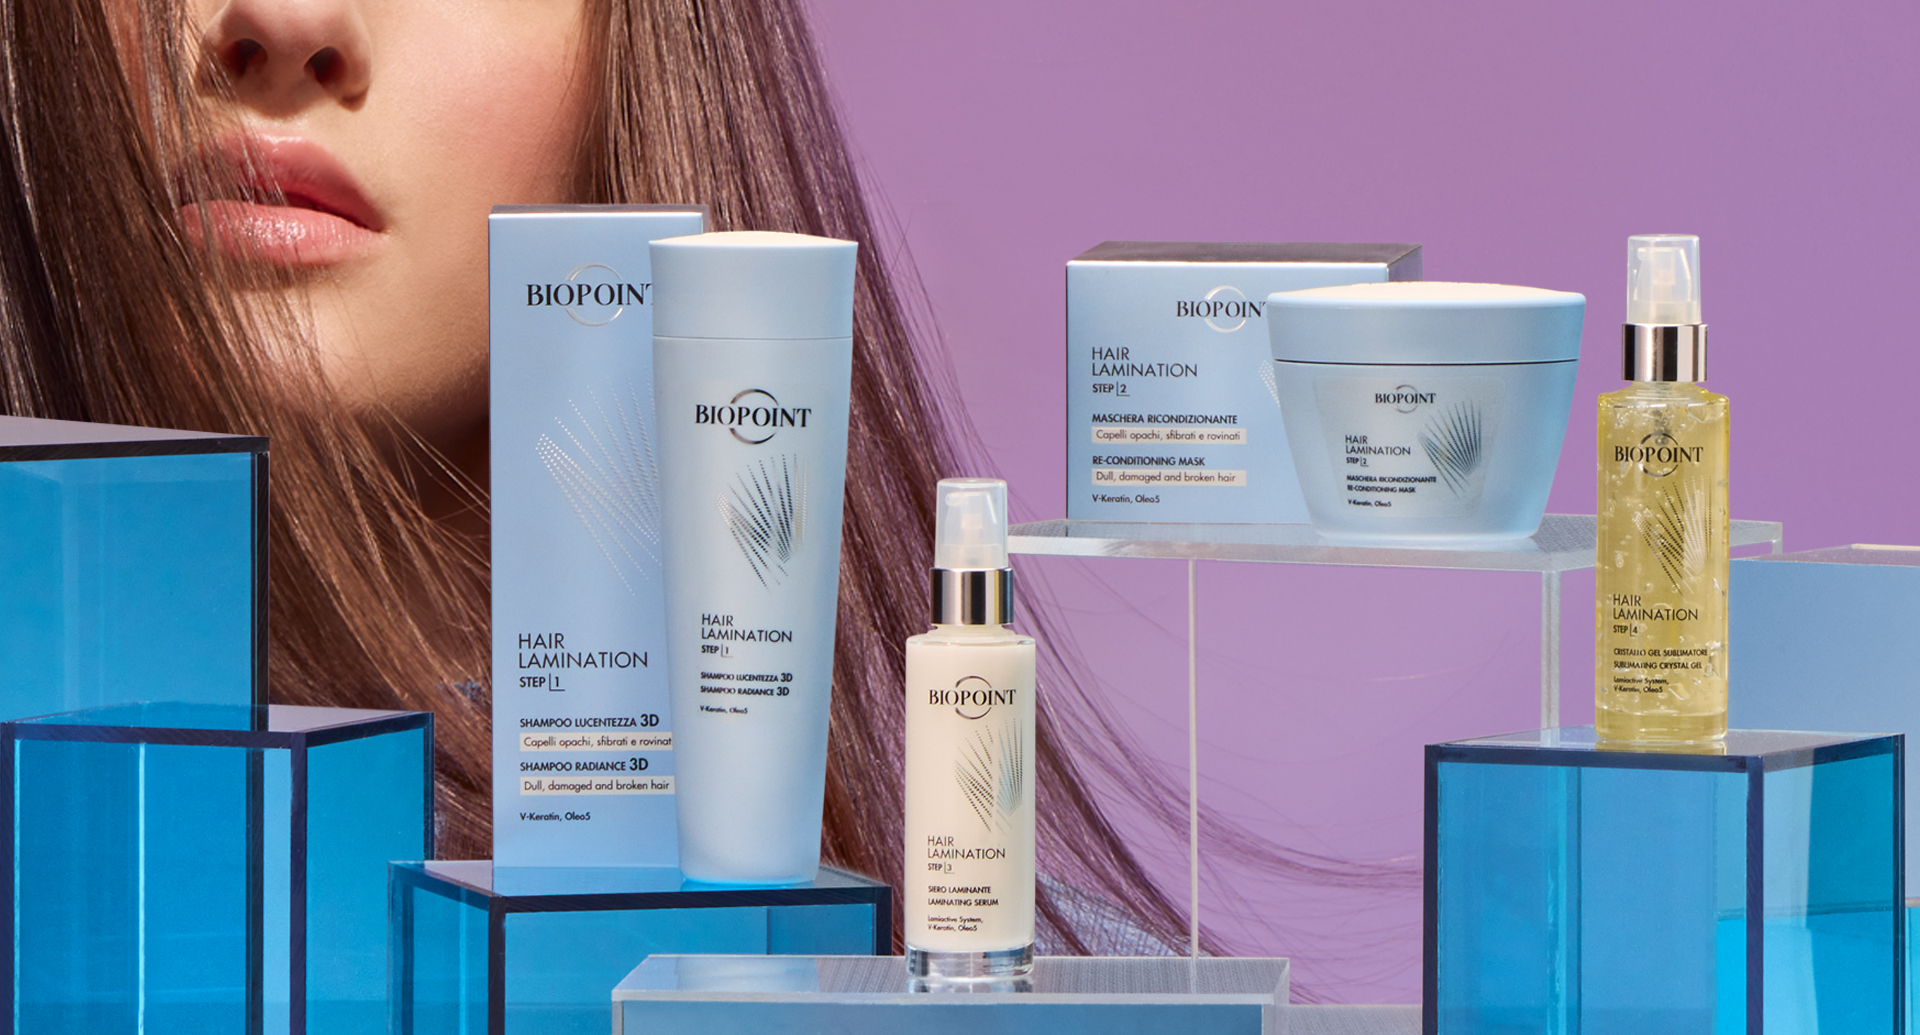 New light to your hair with Biopoint Hair Lamination.